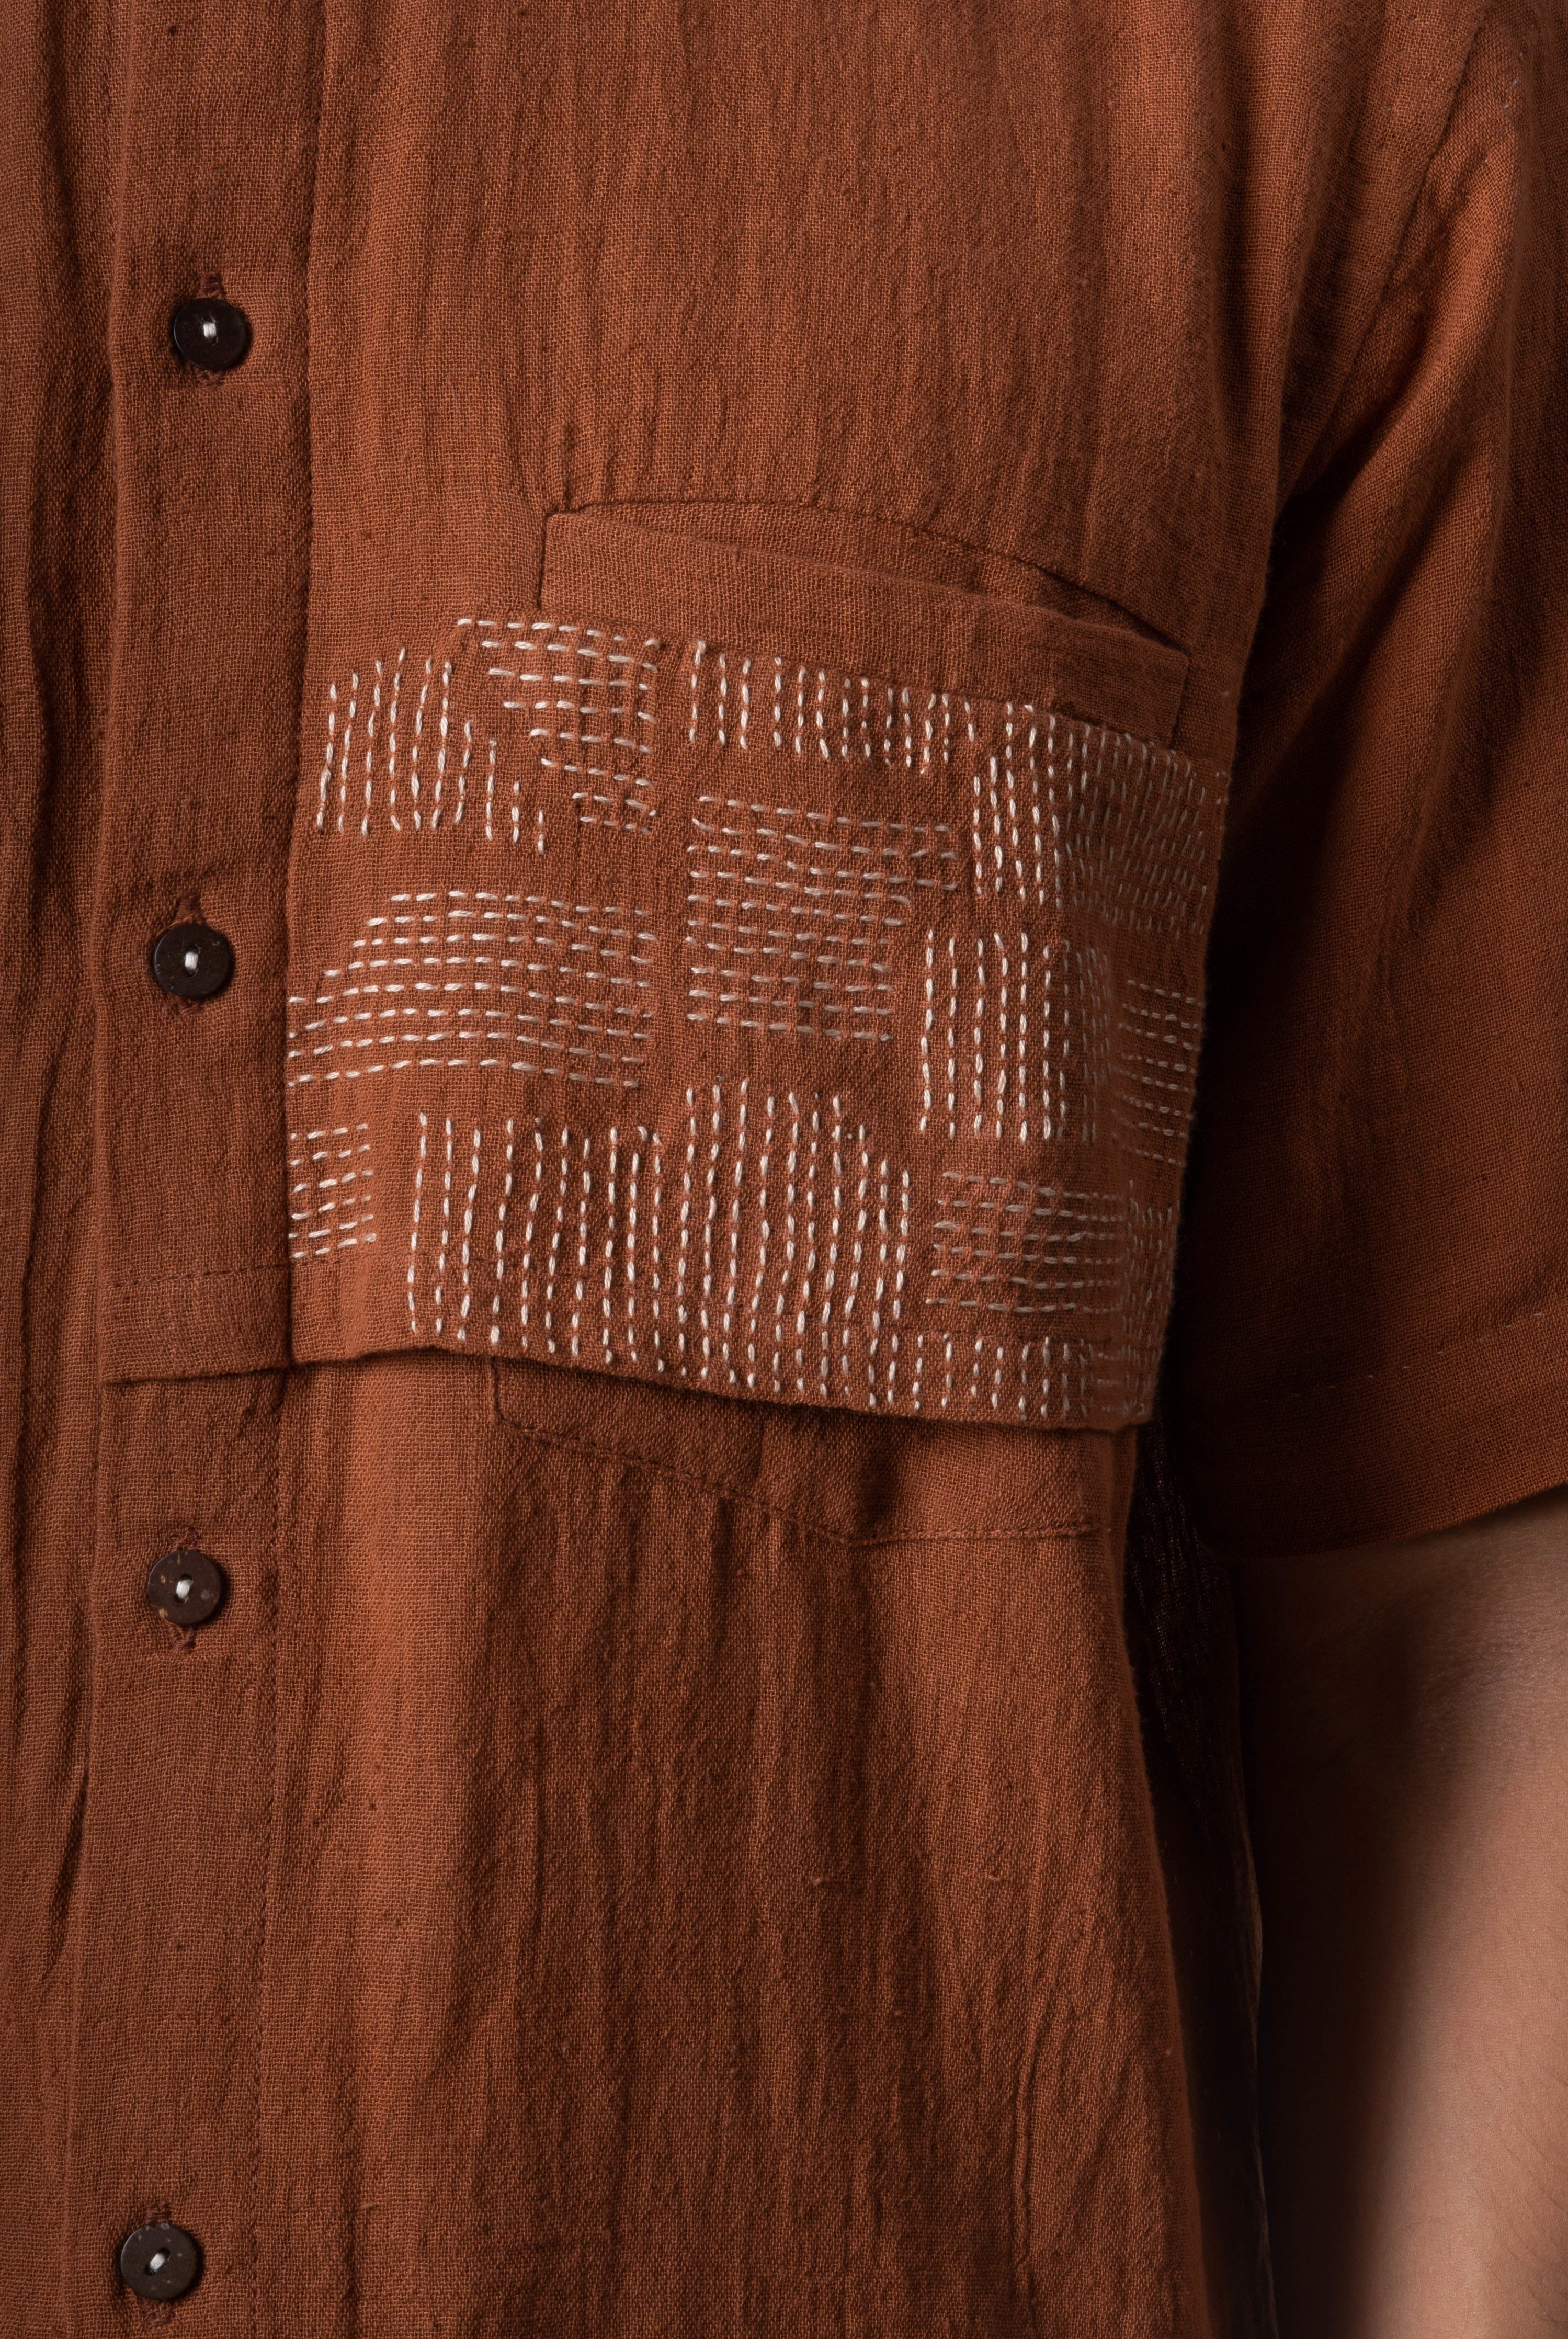 Extra Fabric Flap Shirt - Our Better Planet